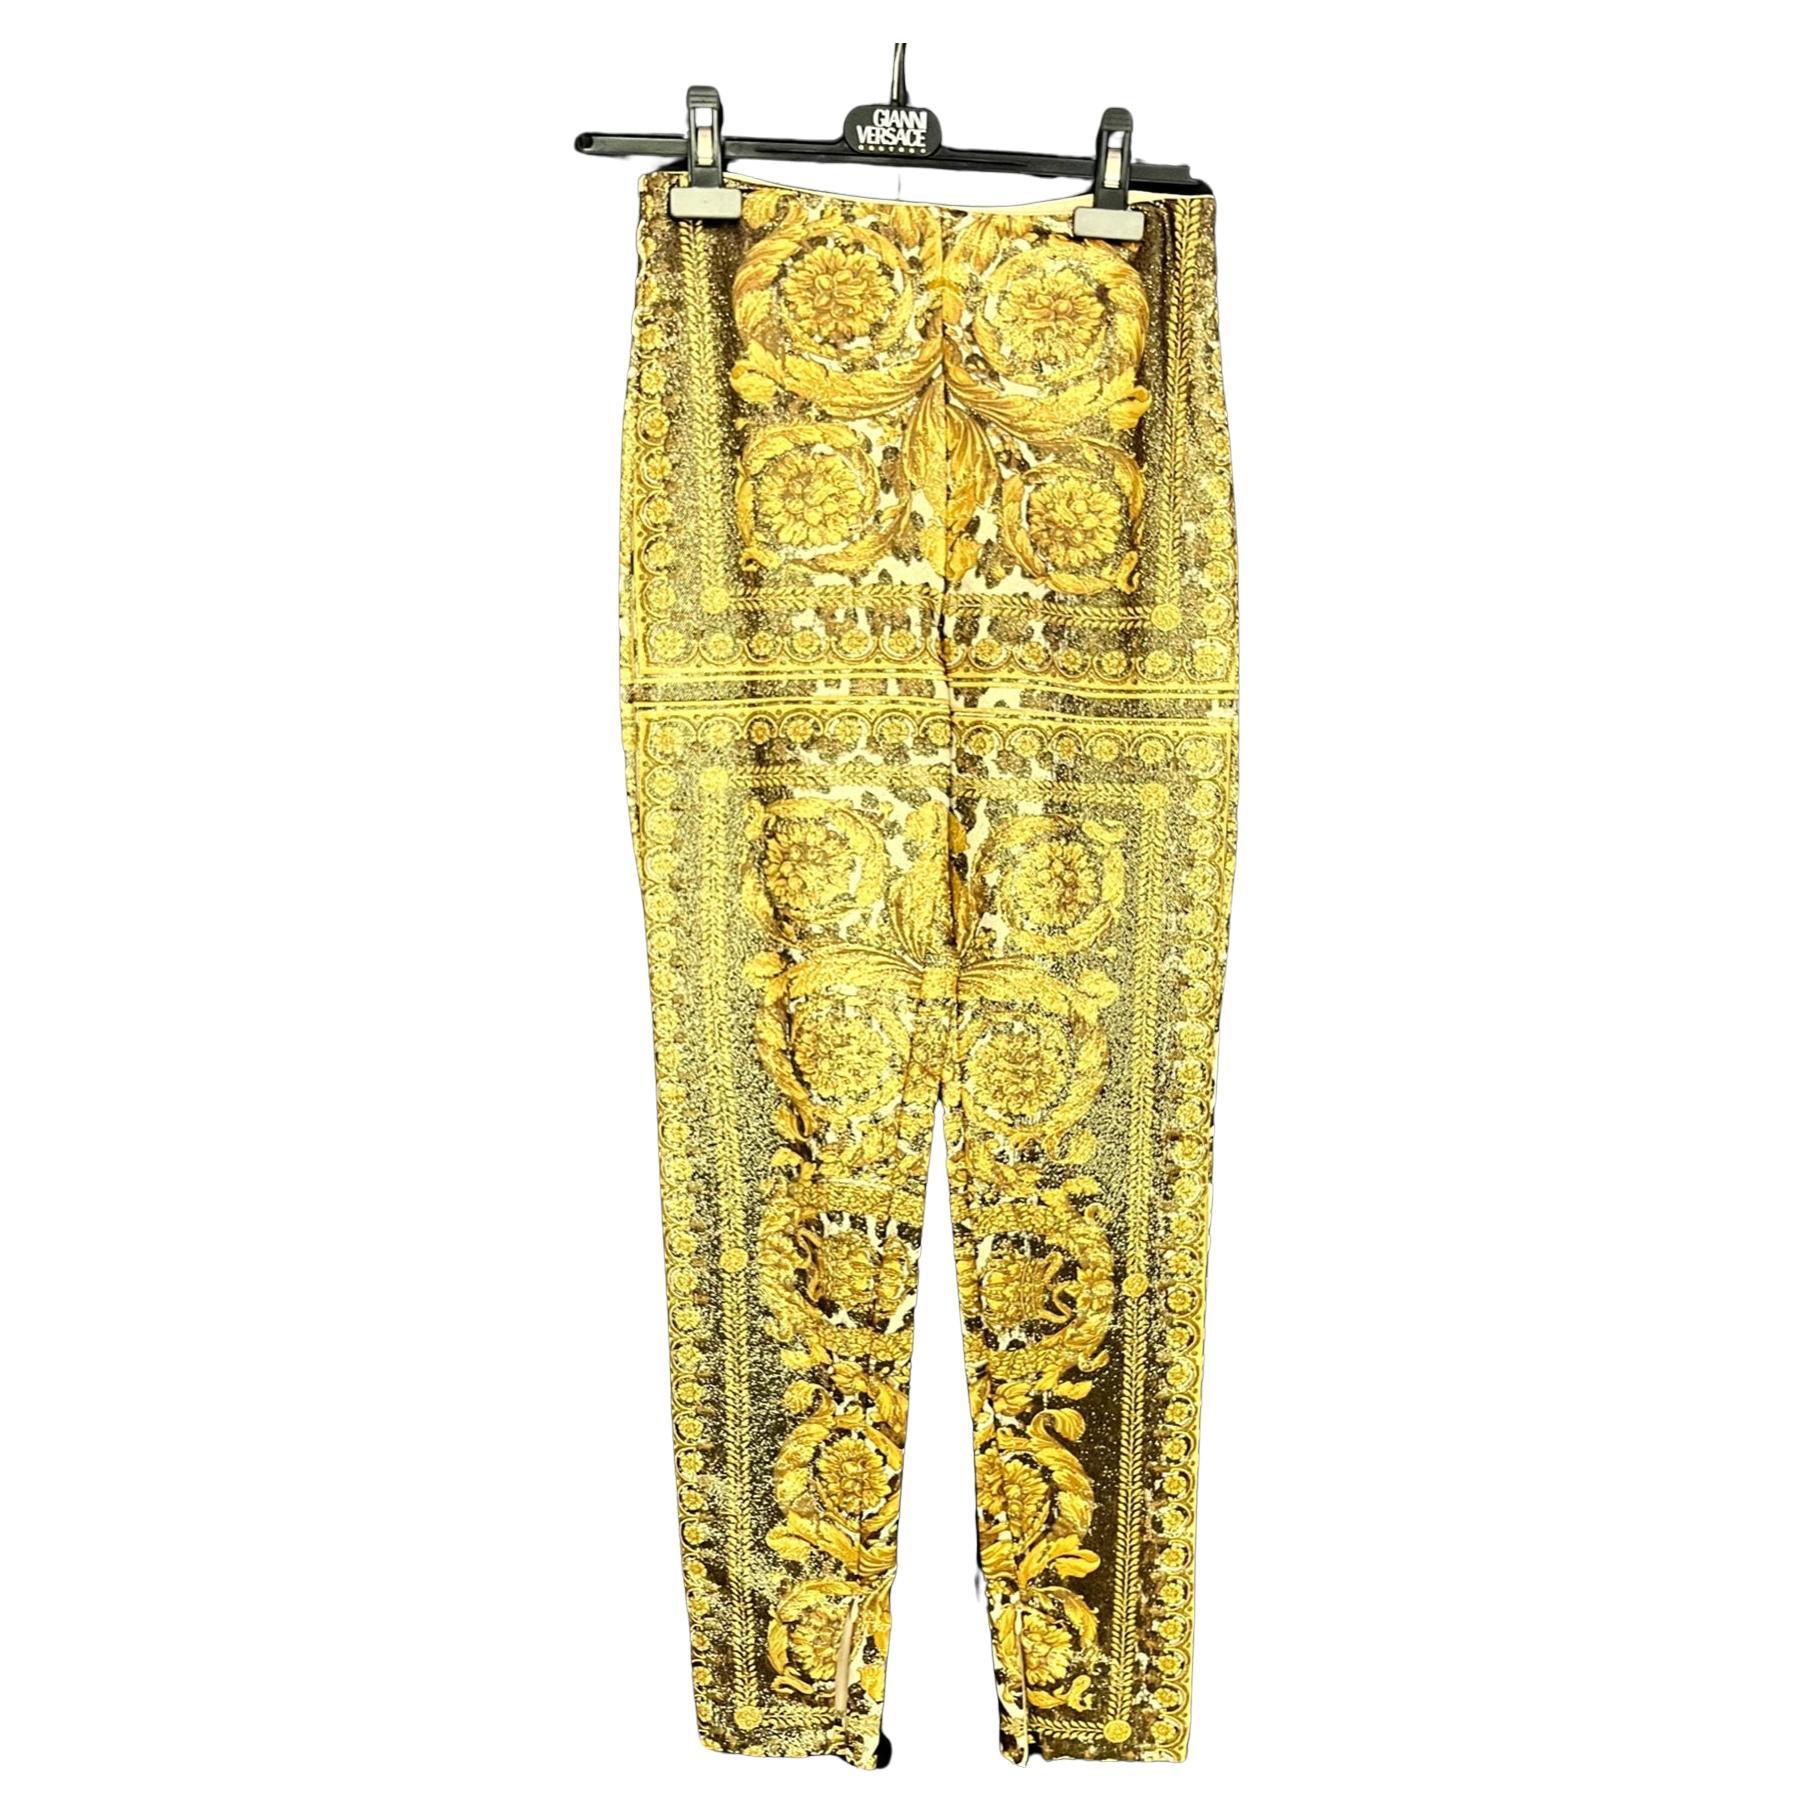 ANIMAL BAROQUE LEGGINGS from MIAMI MANSION GIANNI VERSACE PERSONAL COLLECTION For Sale